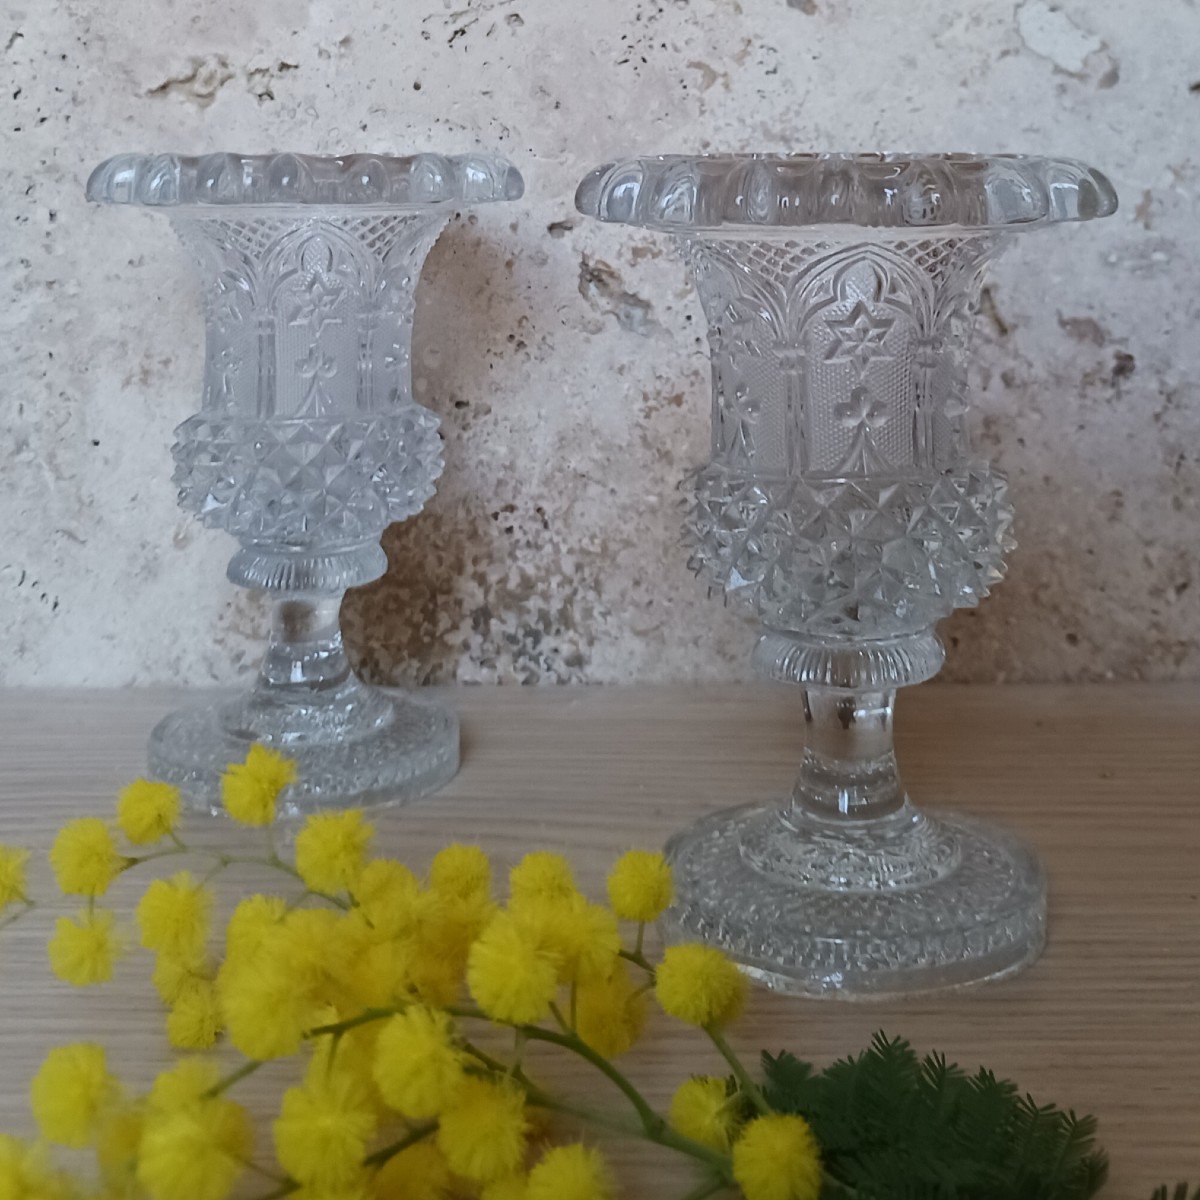 Manufacture Du Creusot Or Baccarat - Rare Pair Of Crystal Medicis Vases With Violets - Restoration Period, Louis Philippe - Troubadour, Neo-gothic Style